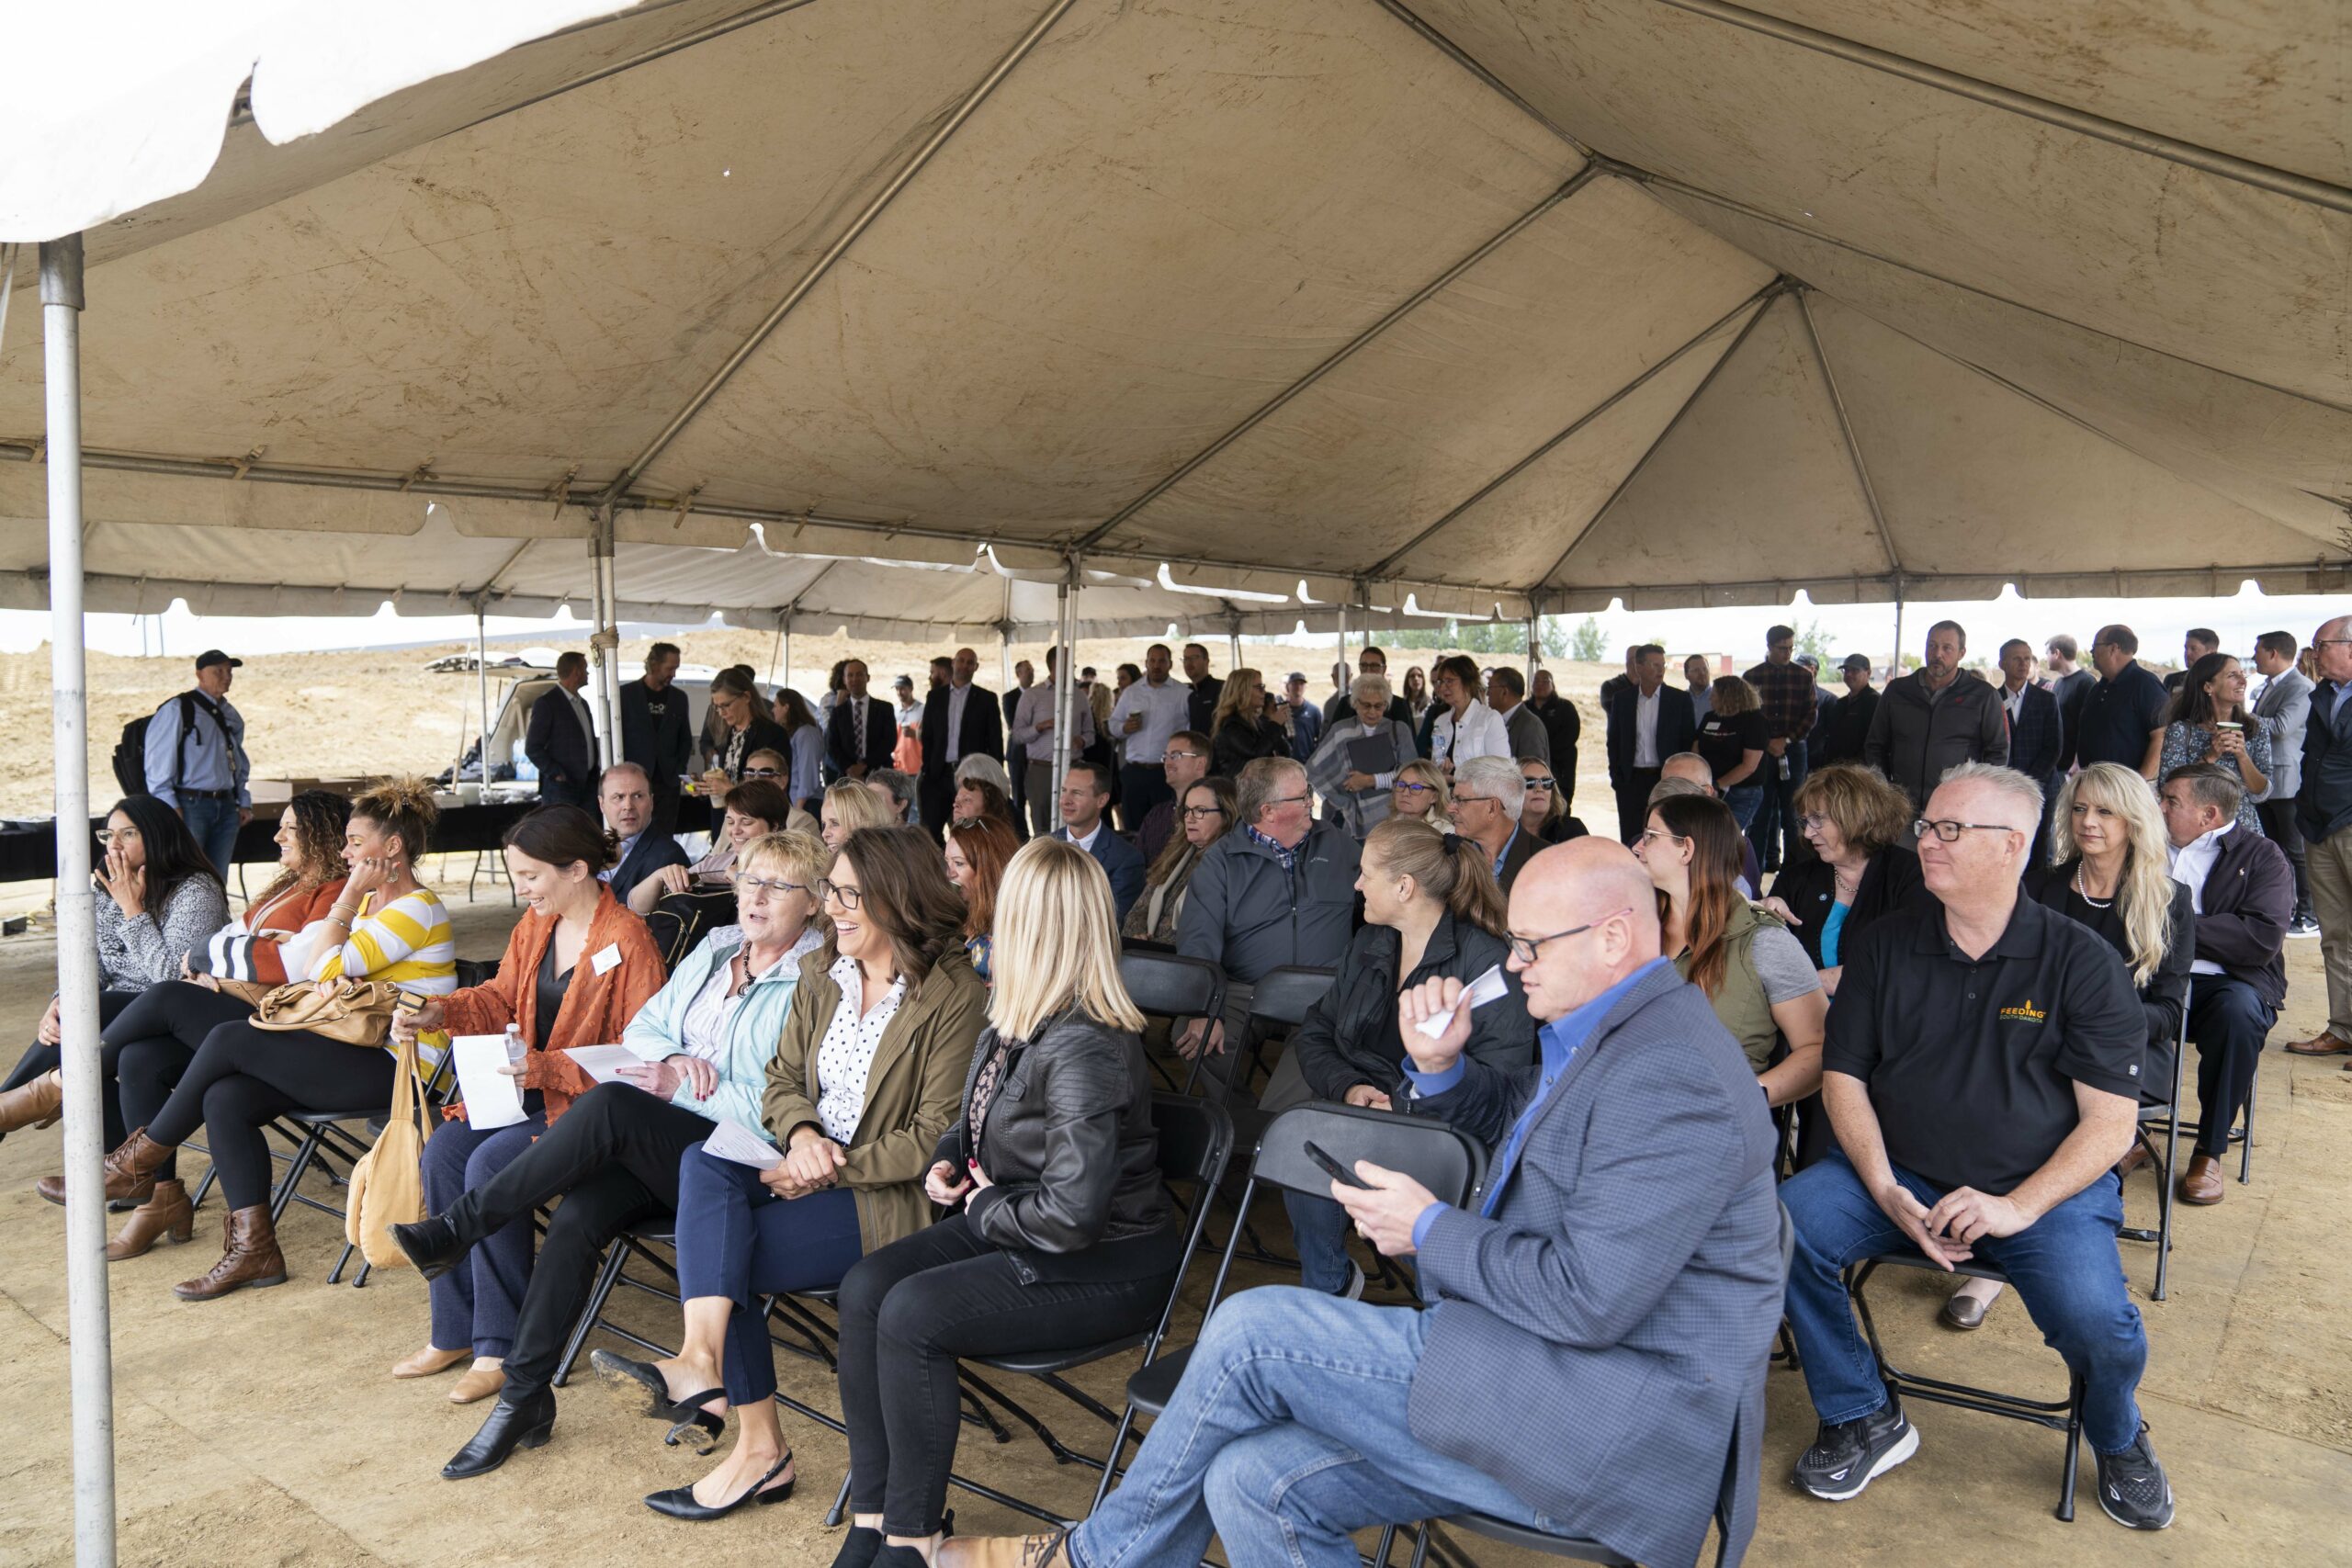 hundreds of people wait for a groundbreaking ceremony in Sioux Falls